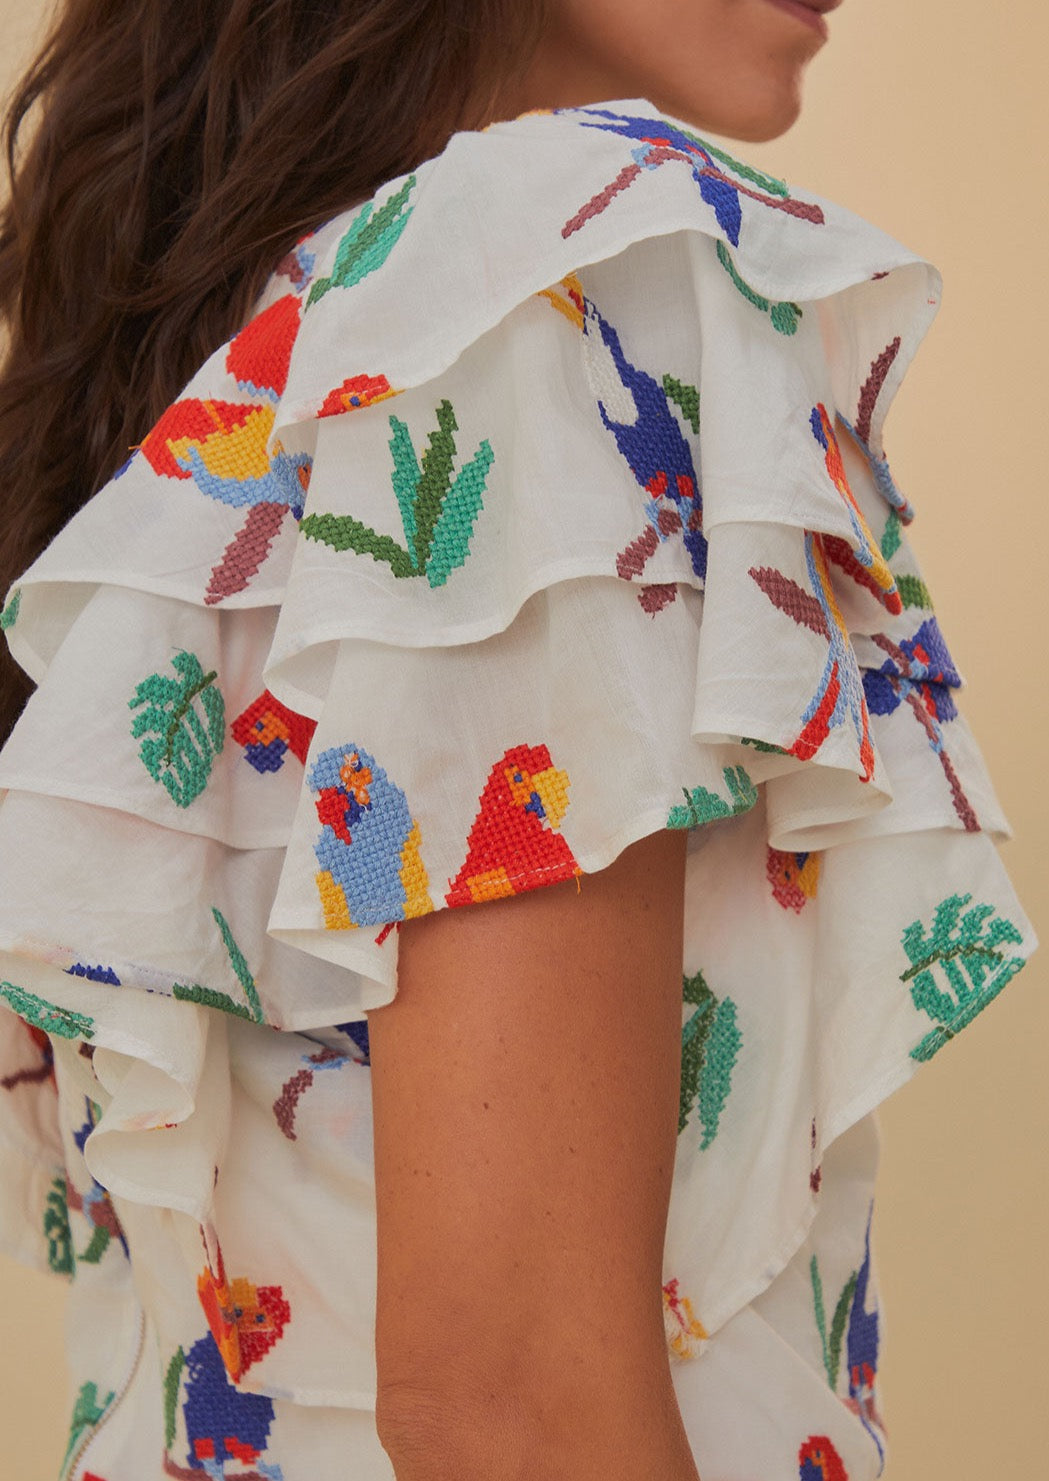 Off White Stitched Birds Blouse Short Sleeves